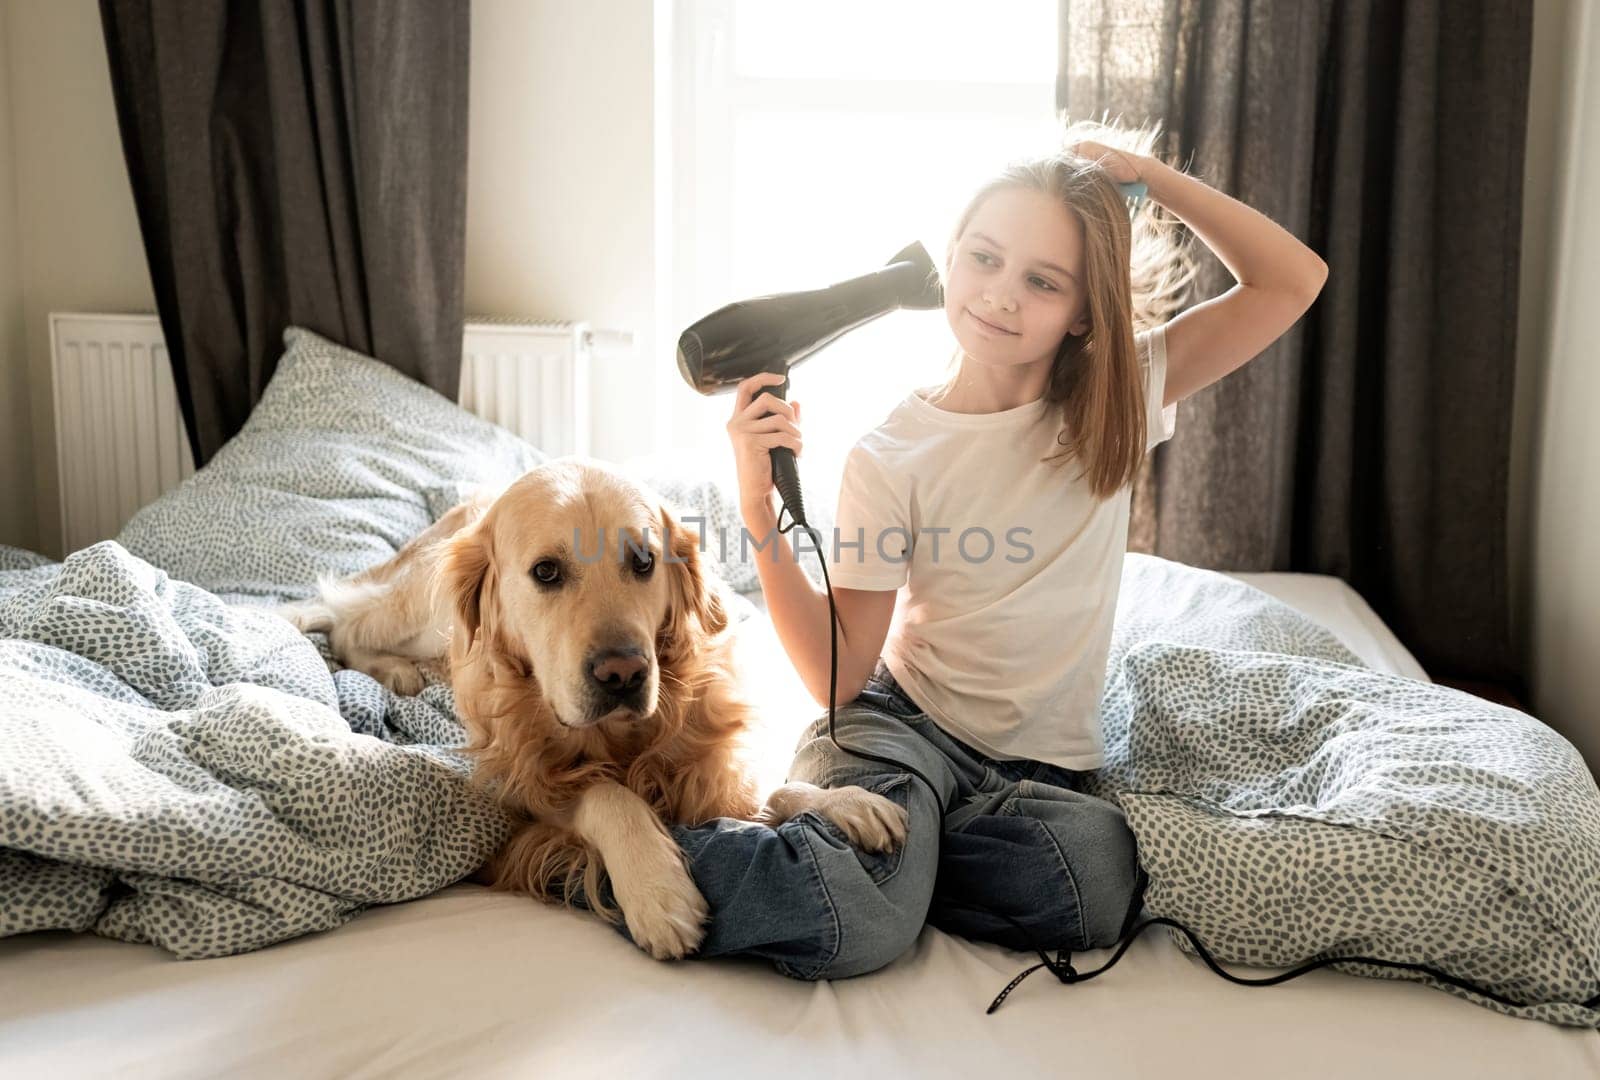 Cute Little Girl Drying Hair With A Hairdryer by GekaSkr